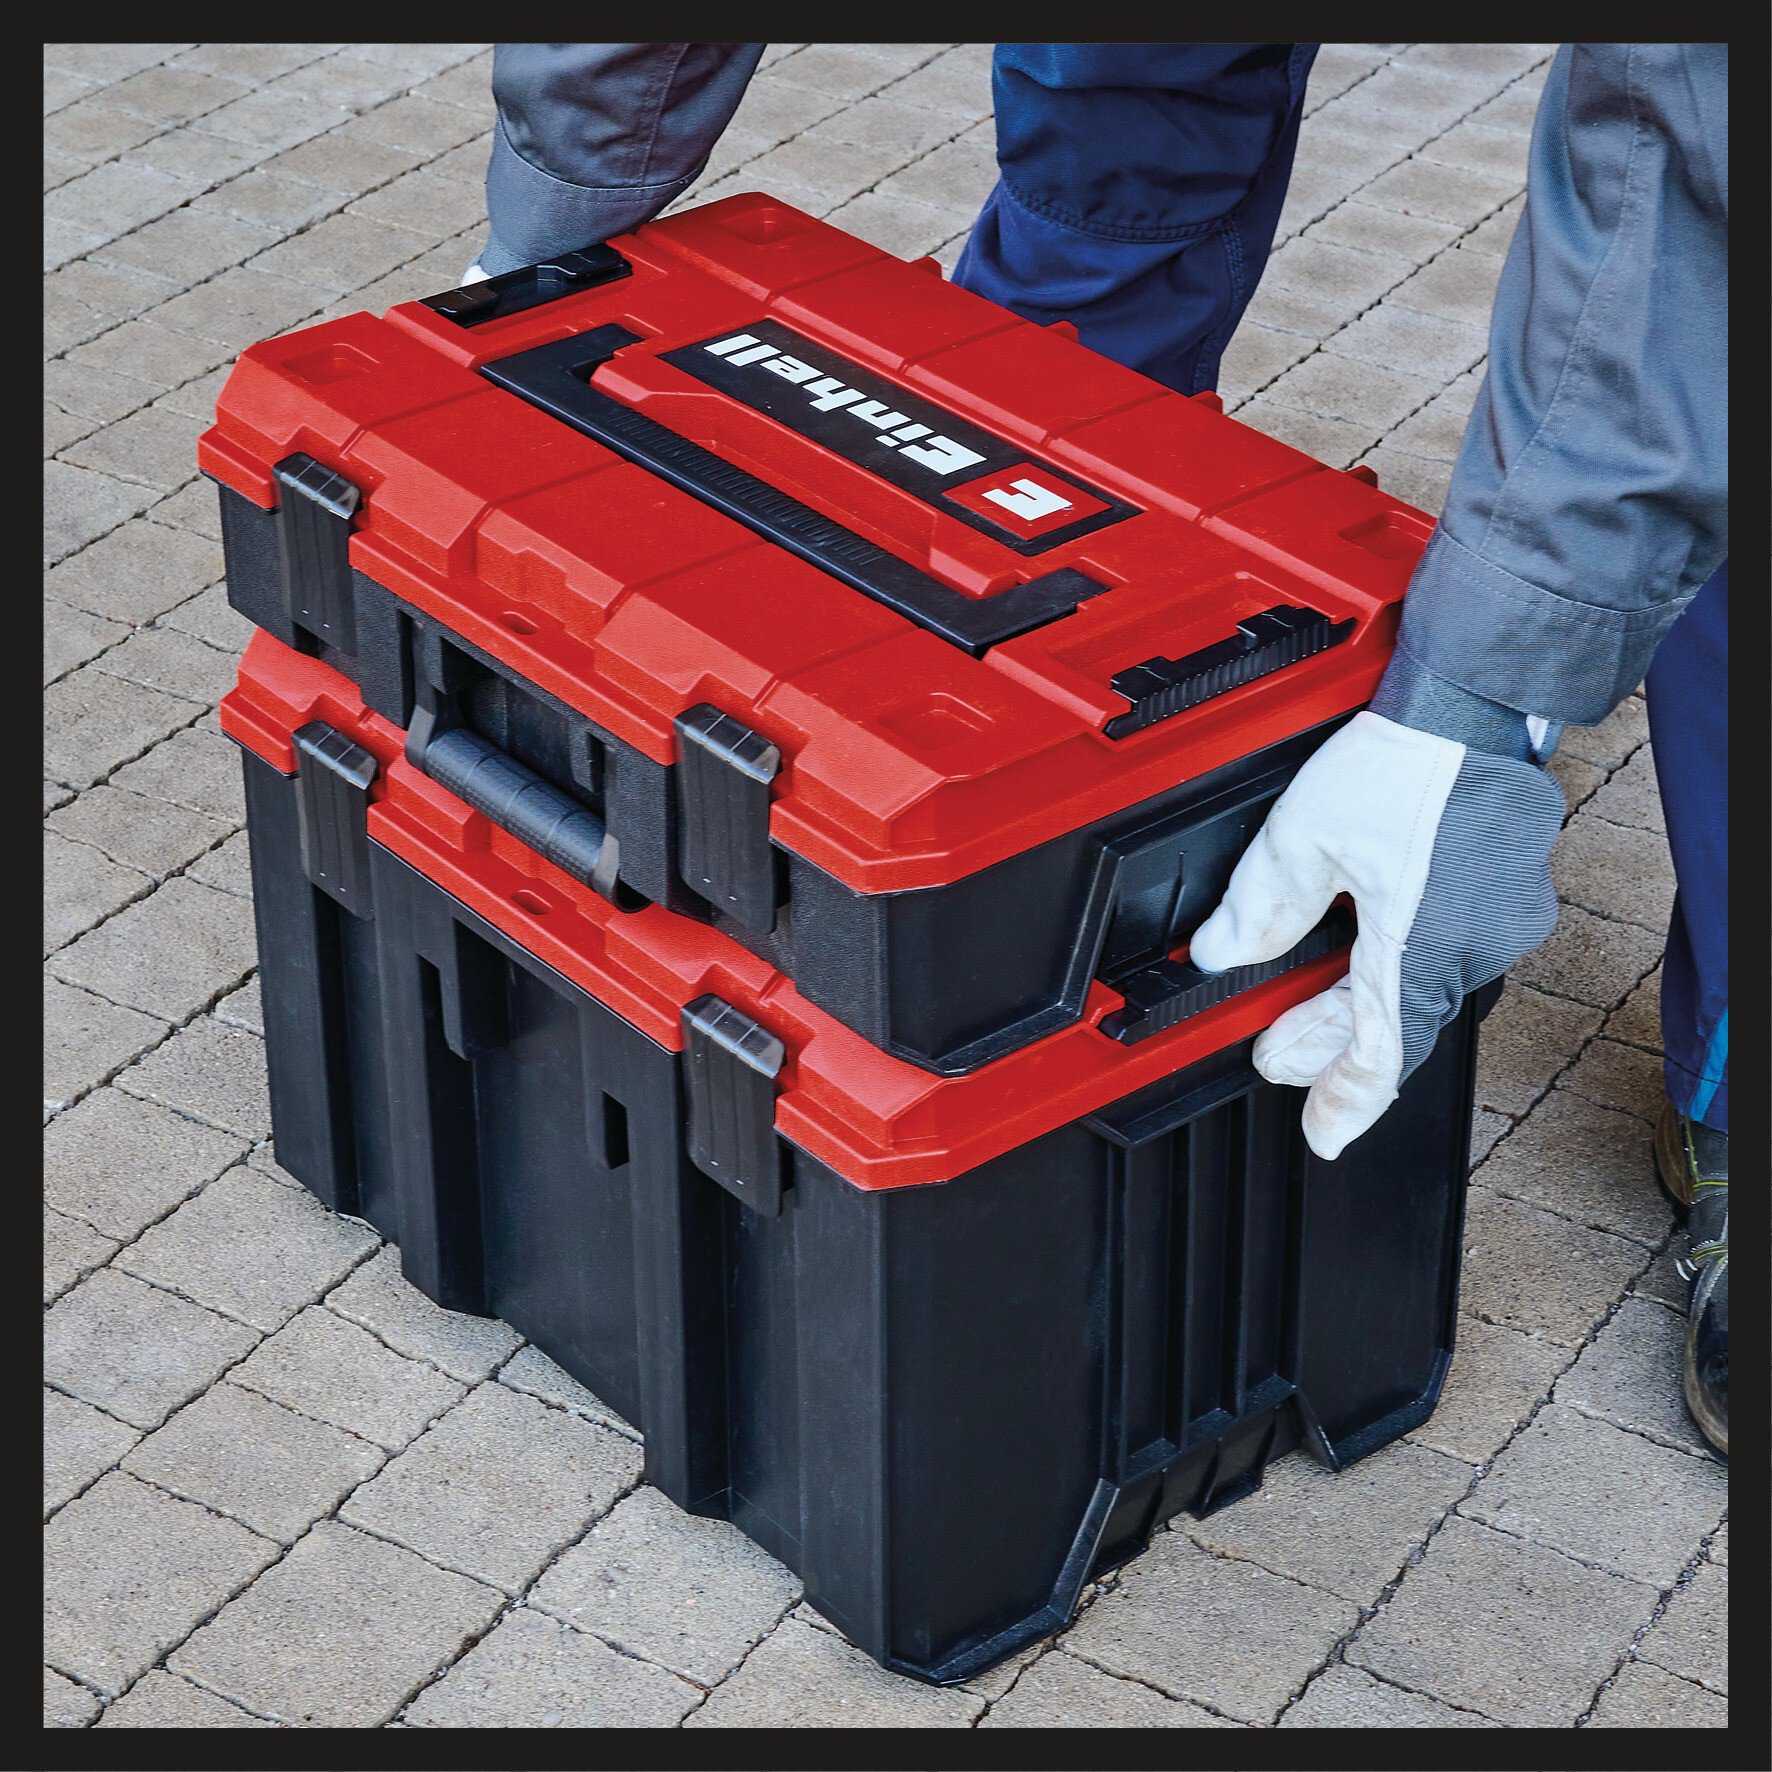 einhell-accessory-system-carrying-case-4540021-detail_image-001